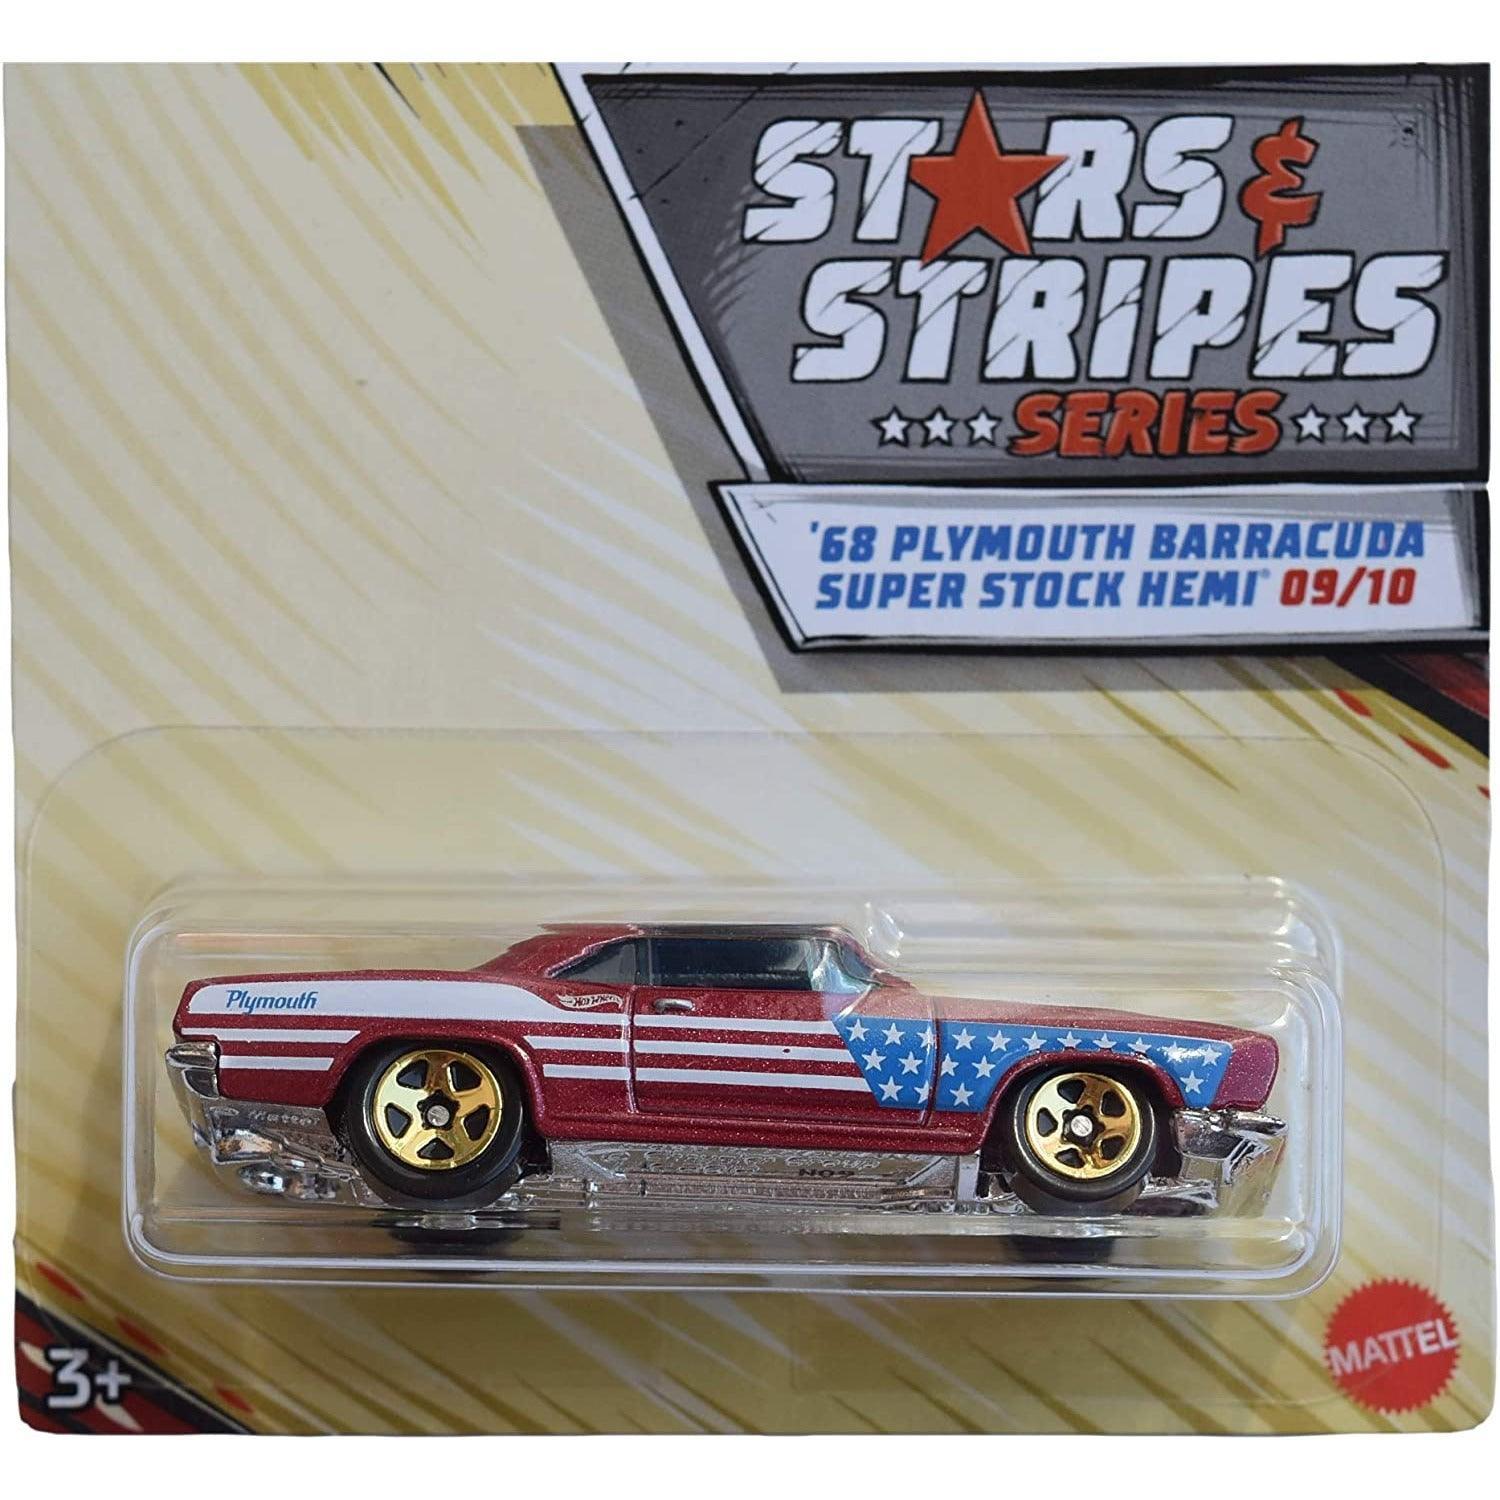 Hot Wheels American Stars & Stripes Series 68 Plymouth Barracuda Super Stock Hemi [Red] 9/10 - BumbleToys - 2-4 Years, 5-7 Years, Boys, Collectible Vehicles, Pre-Order